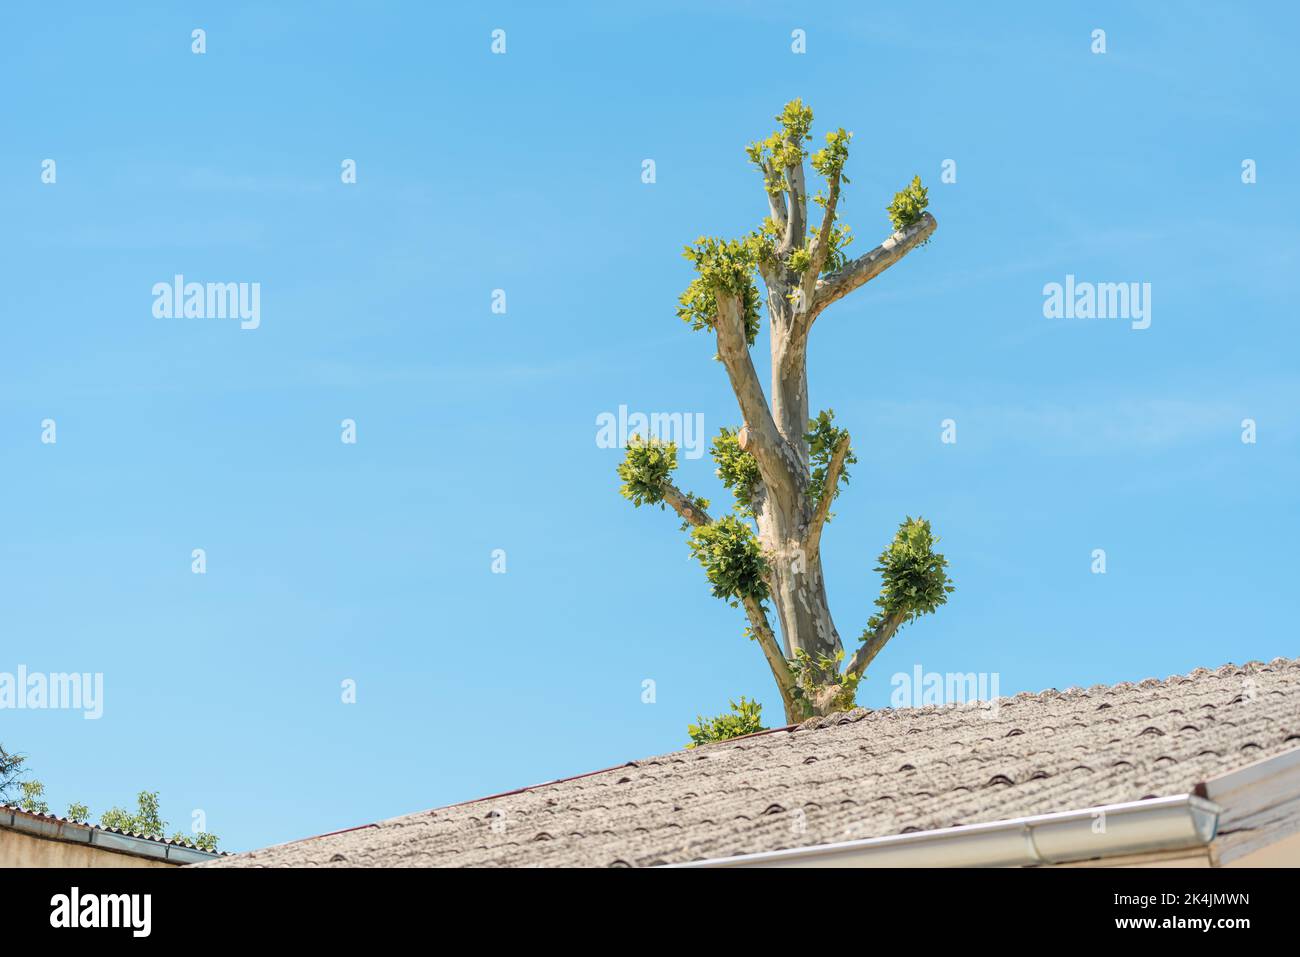 Tree topping, small branches with green leaves growing at treetop after severe pruning against blue sky Stock Photo